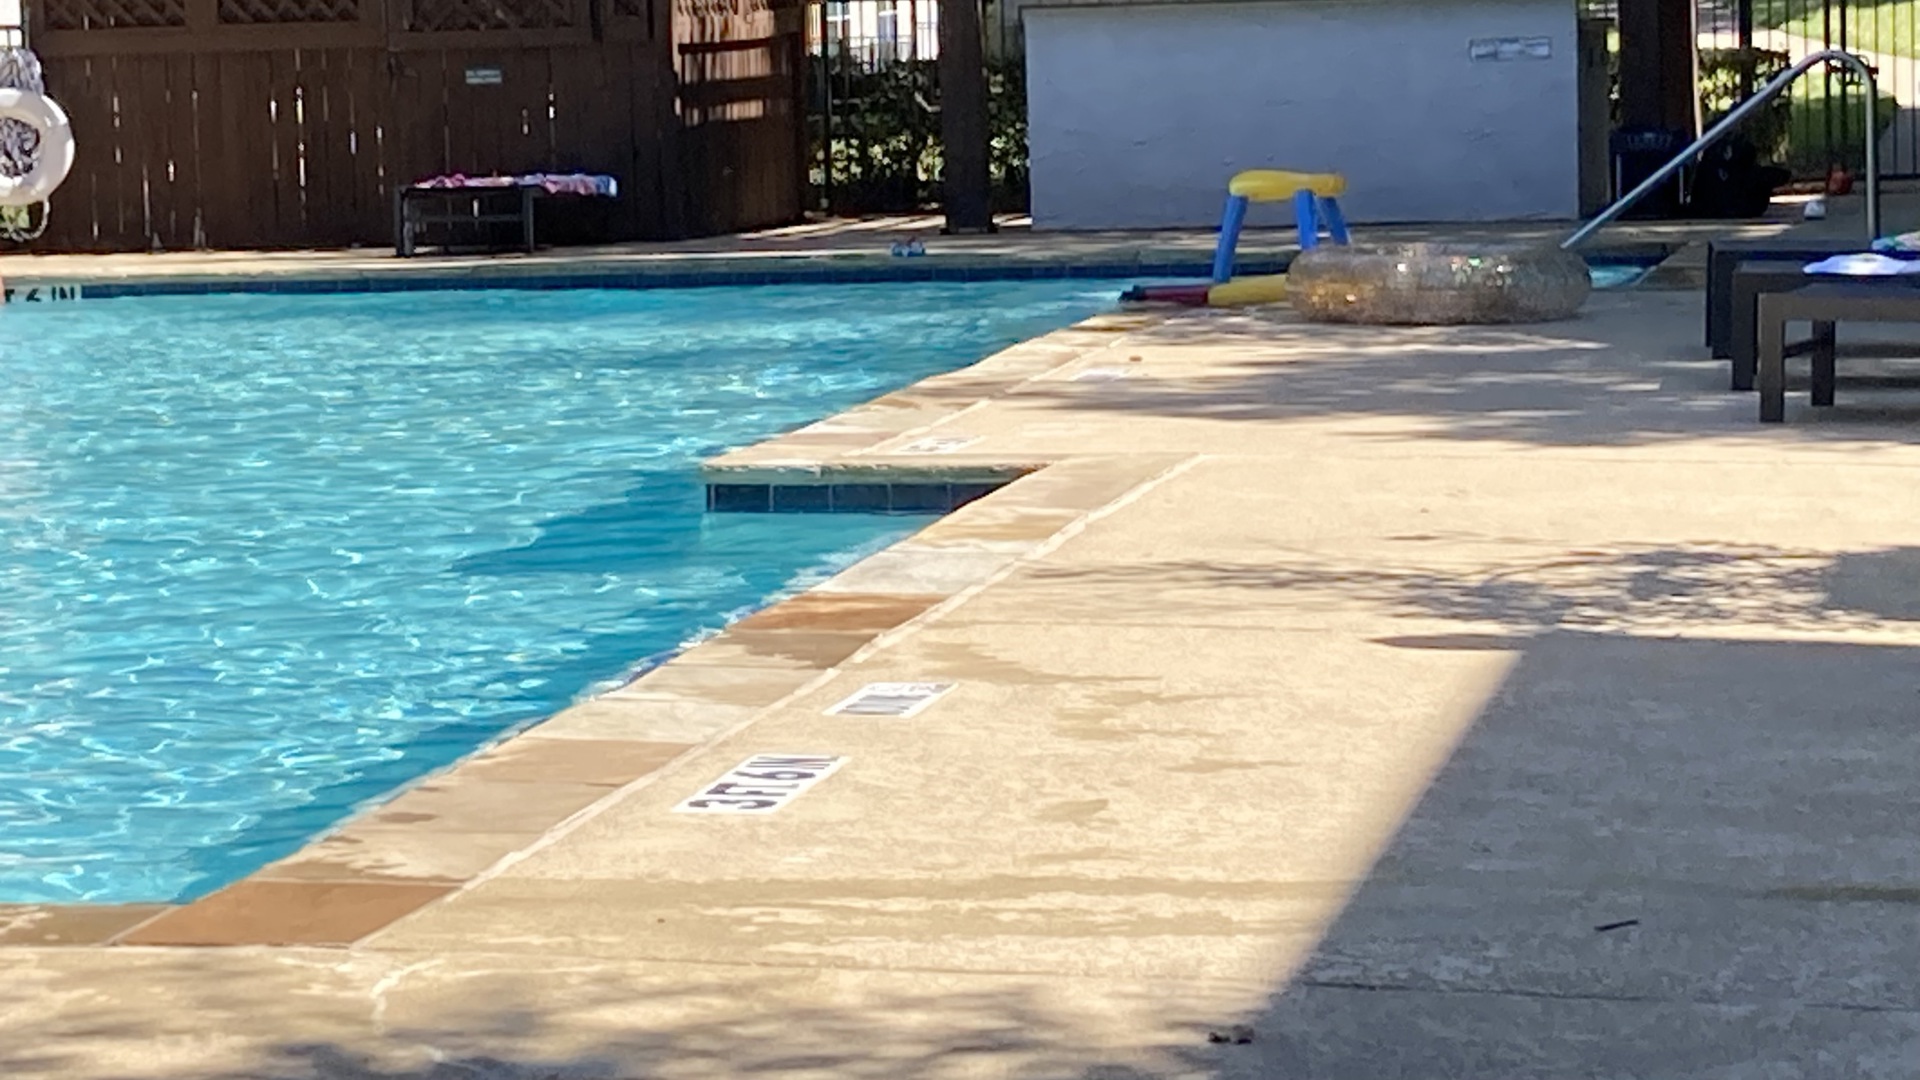 The May incident allegedly occurred at an apartment complex pool in the Dallas-Fort Worth suburb of Euless. The victim's family identifies as Palestinian-American.